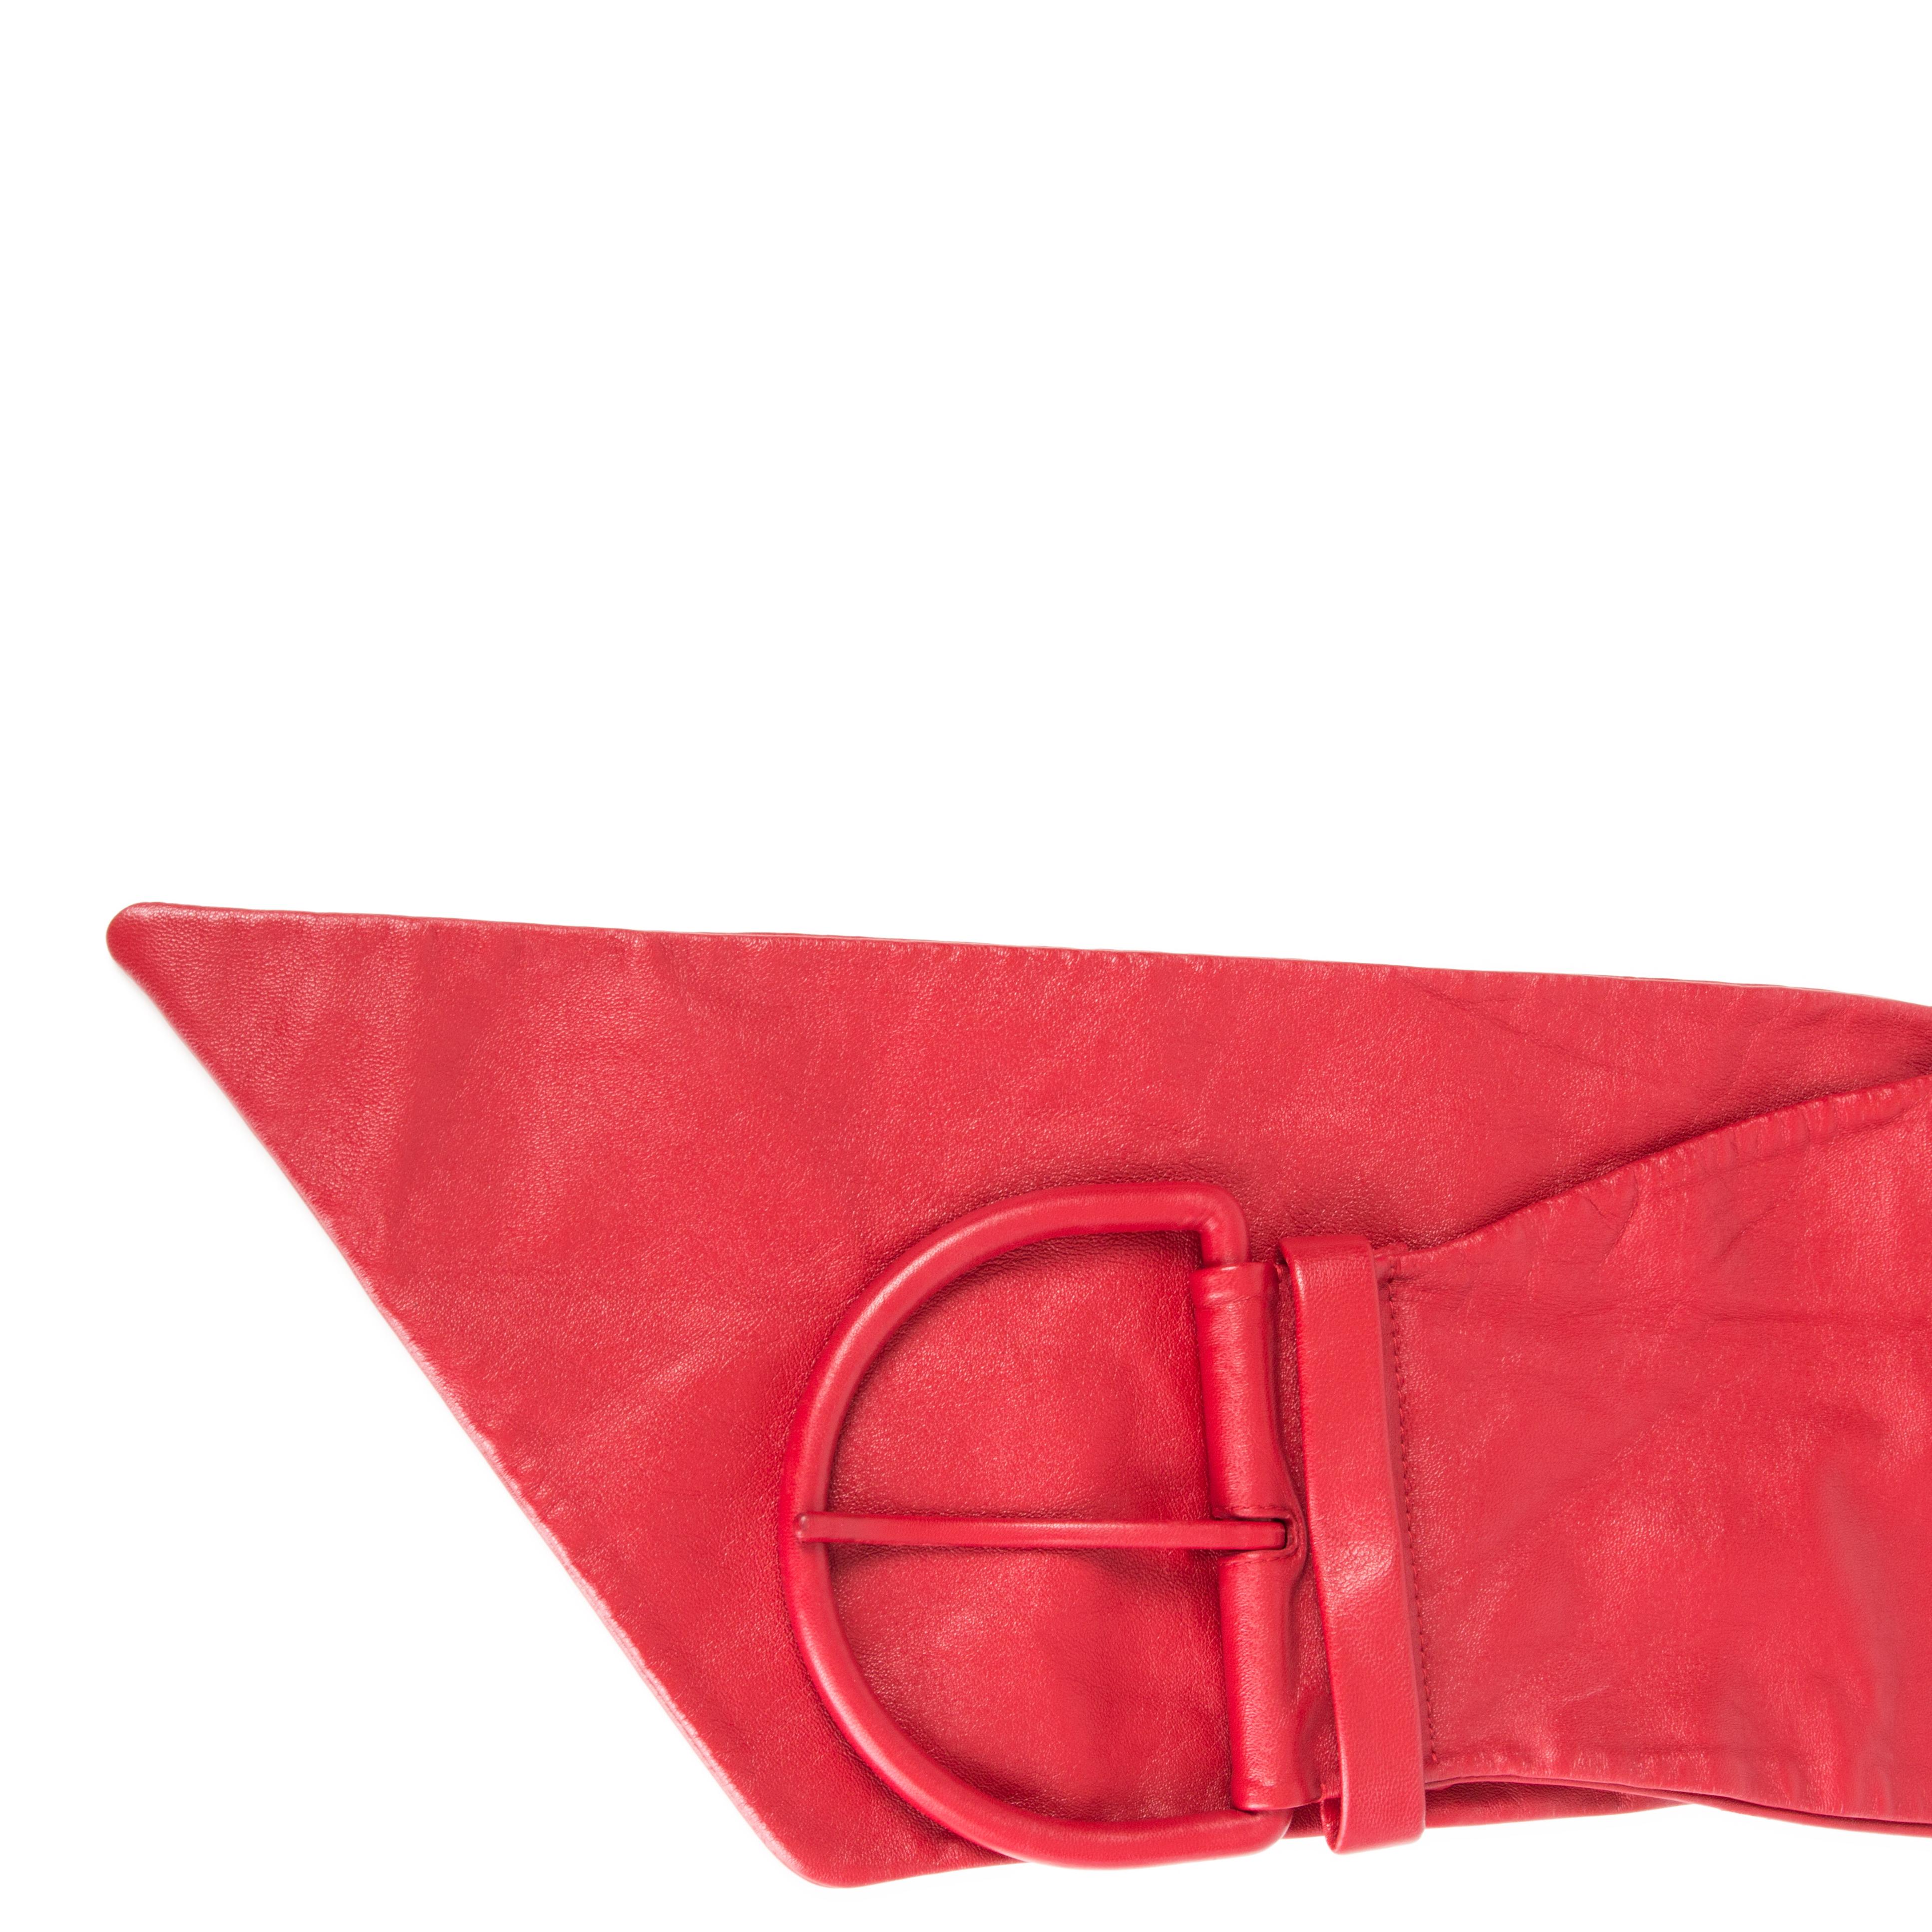 Red BALENCIAGA red SCARF LEATHER WIDE WAIST Belt 75 For Sale